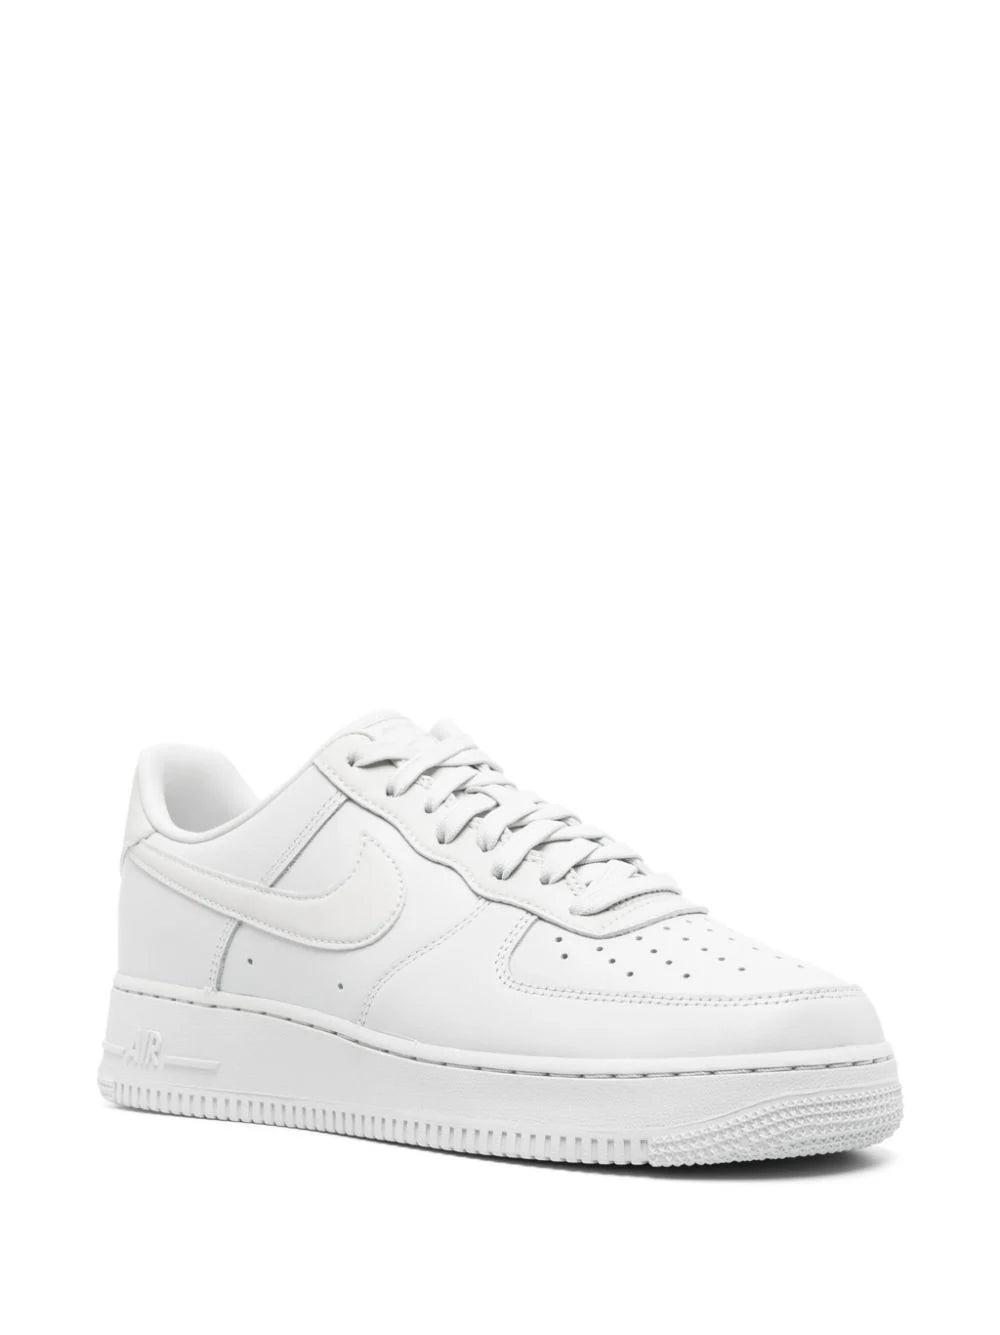 Shoellist | Nike Air Force 1 leather sneakers "White"